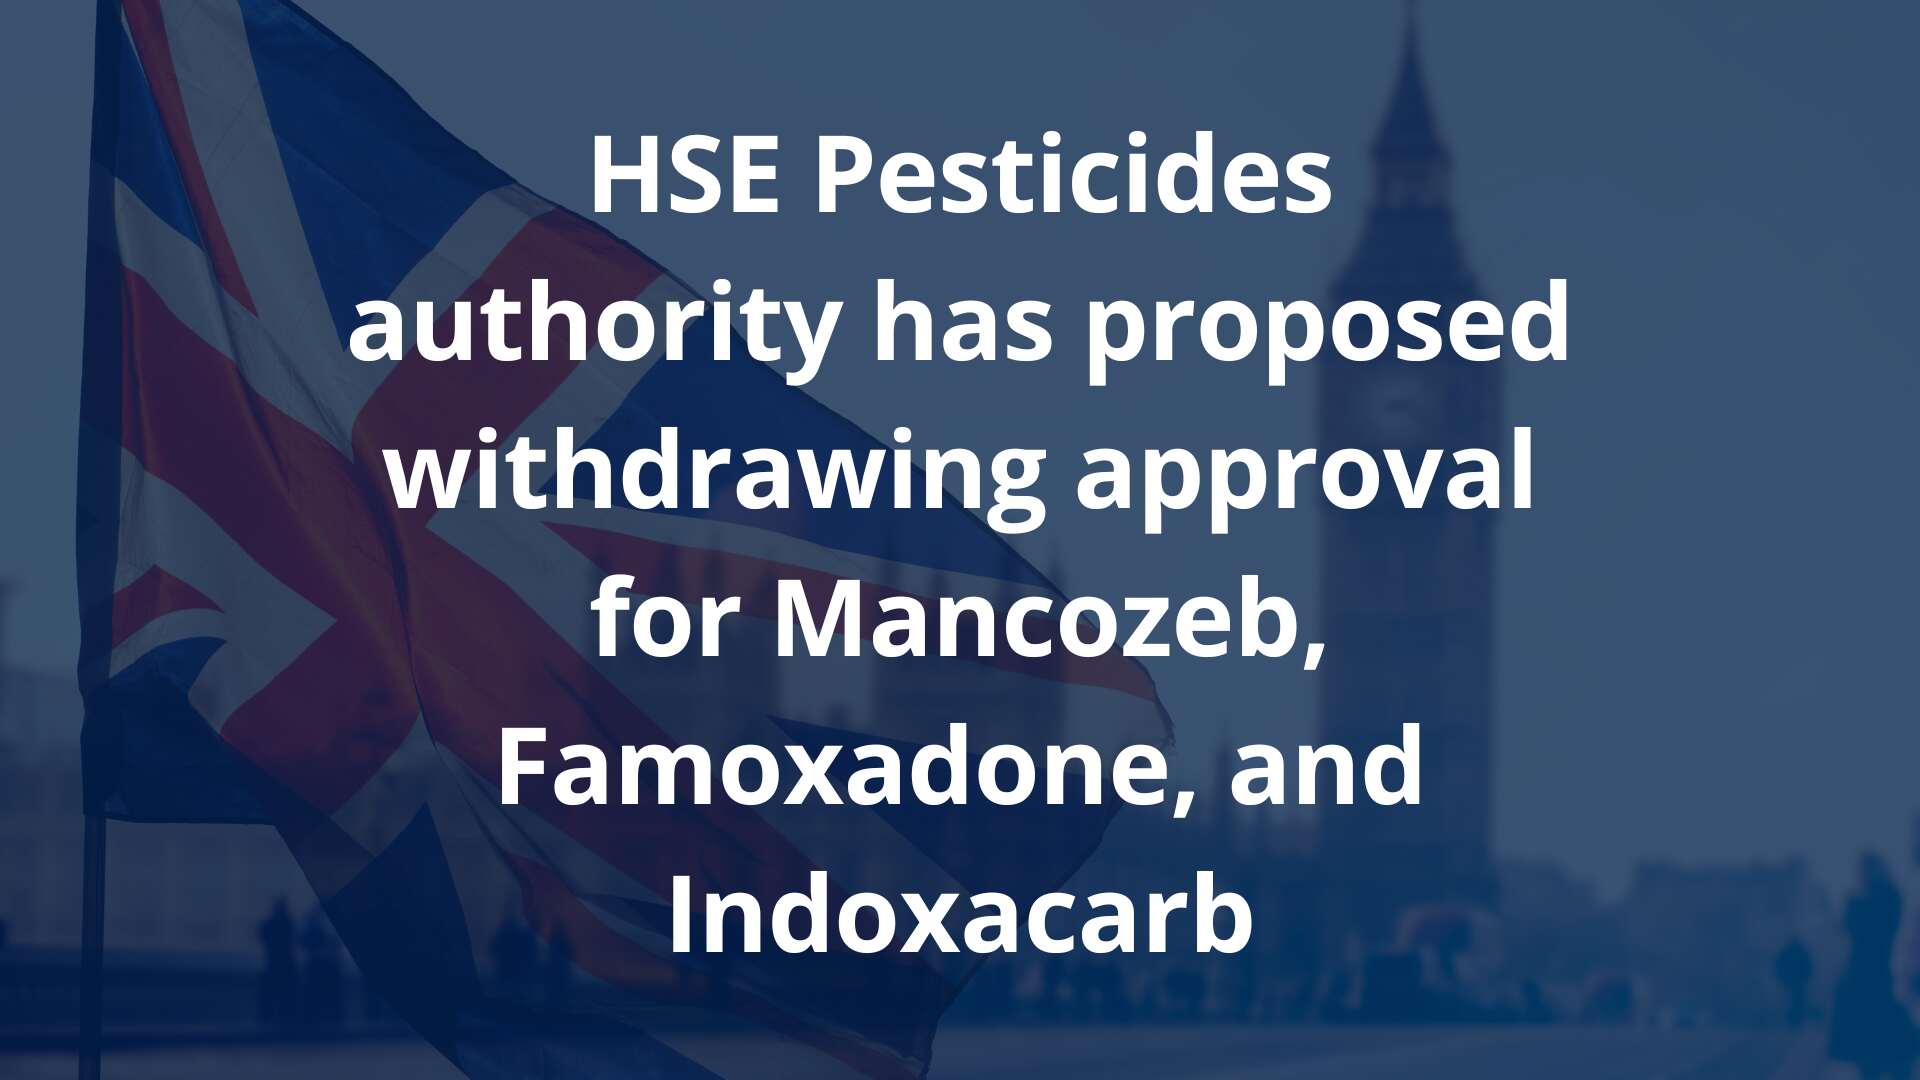 HSE Proposes Withdrawal of Key Fungicides